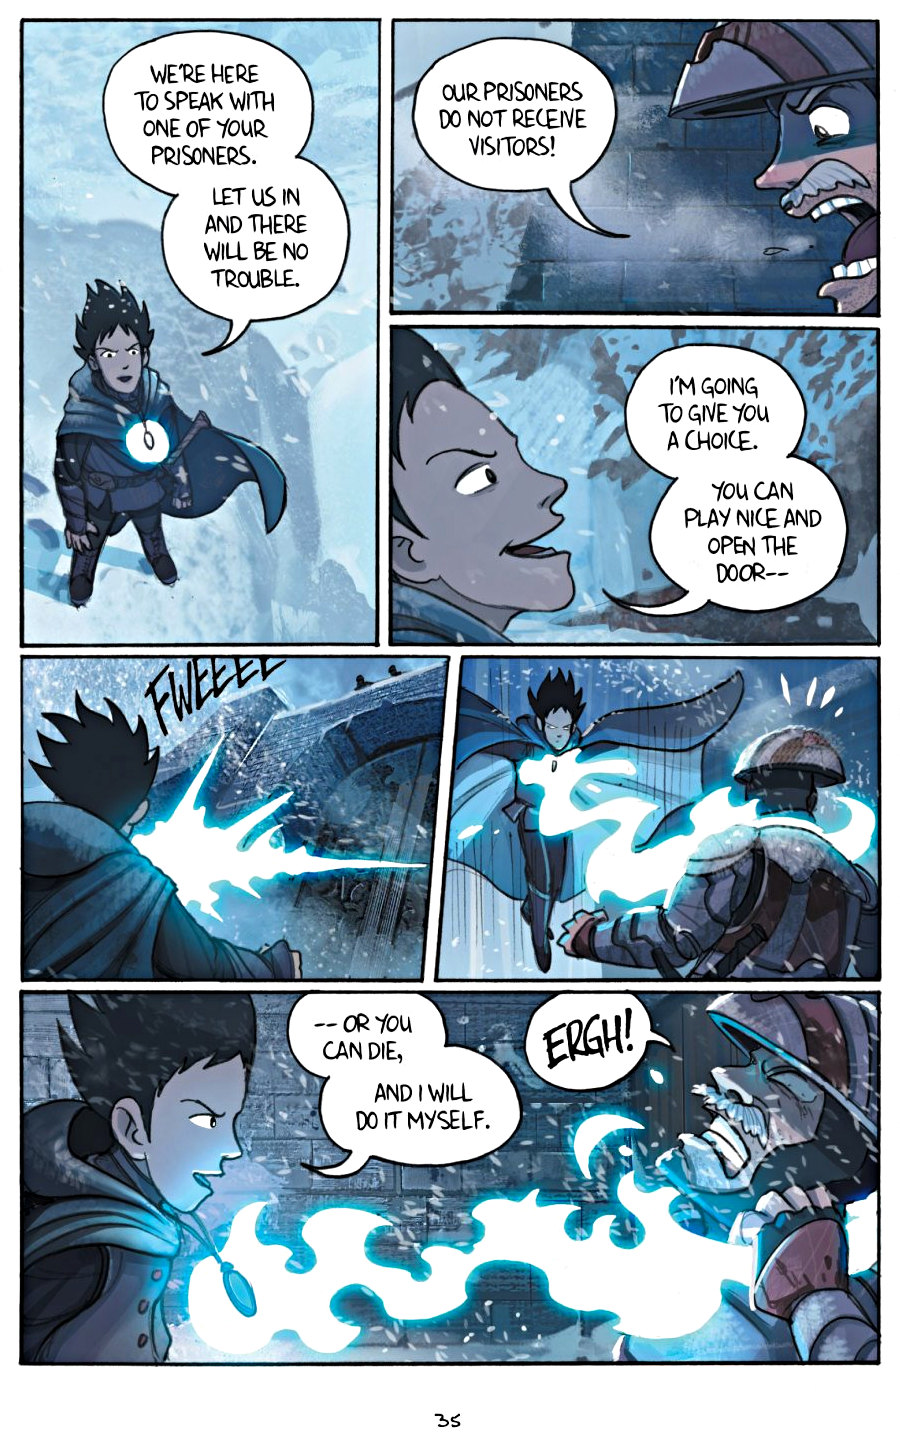 page 35 of amulet 5 prince of the elves graphic novel